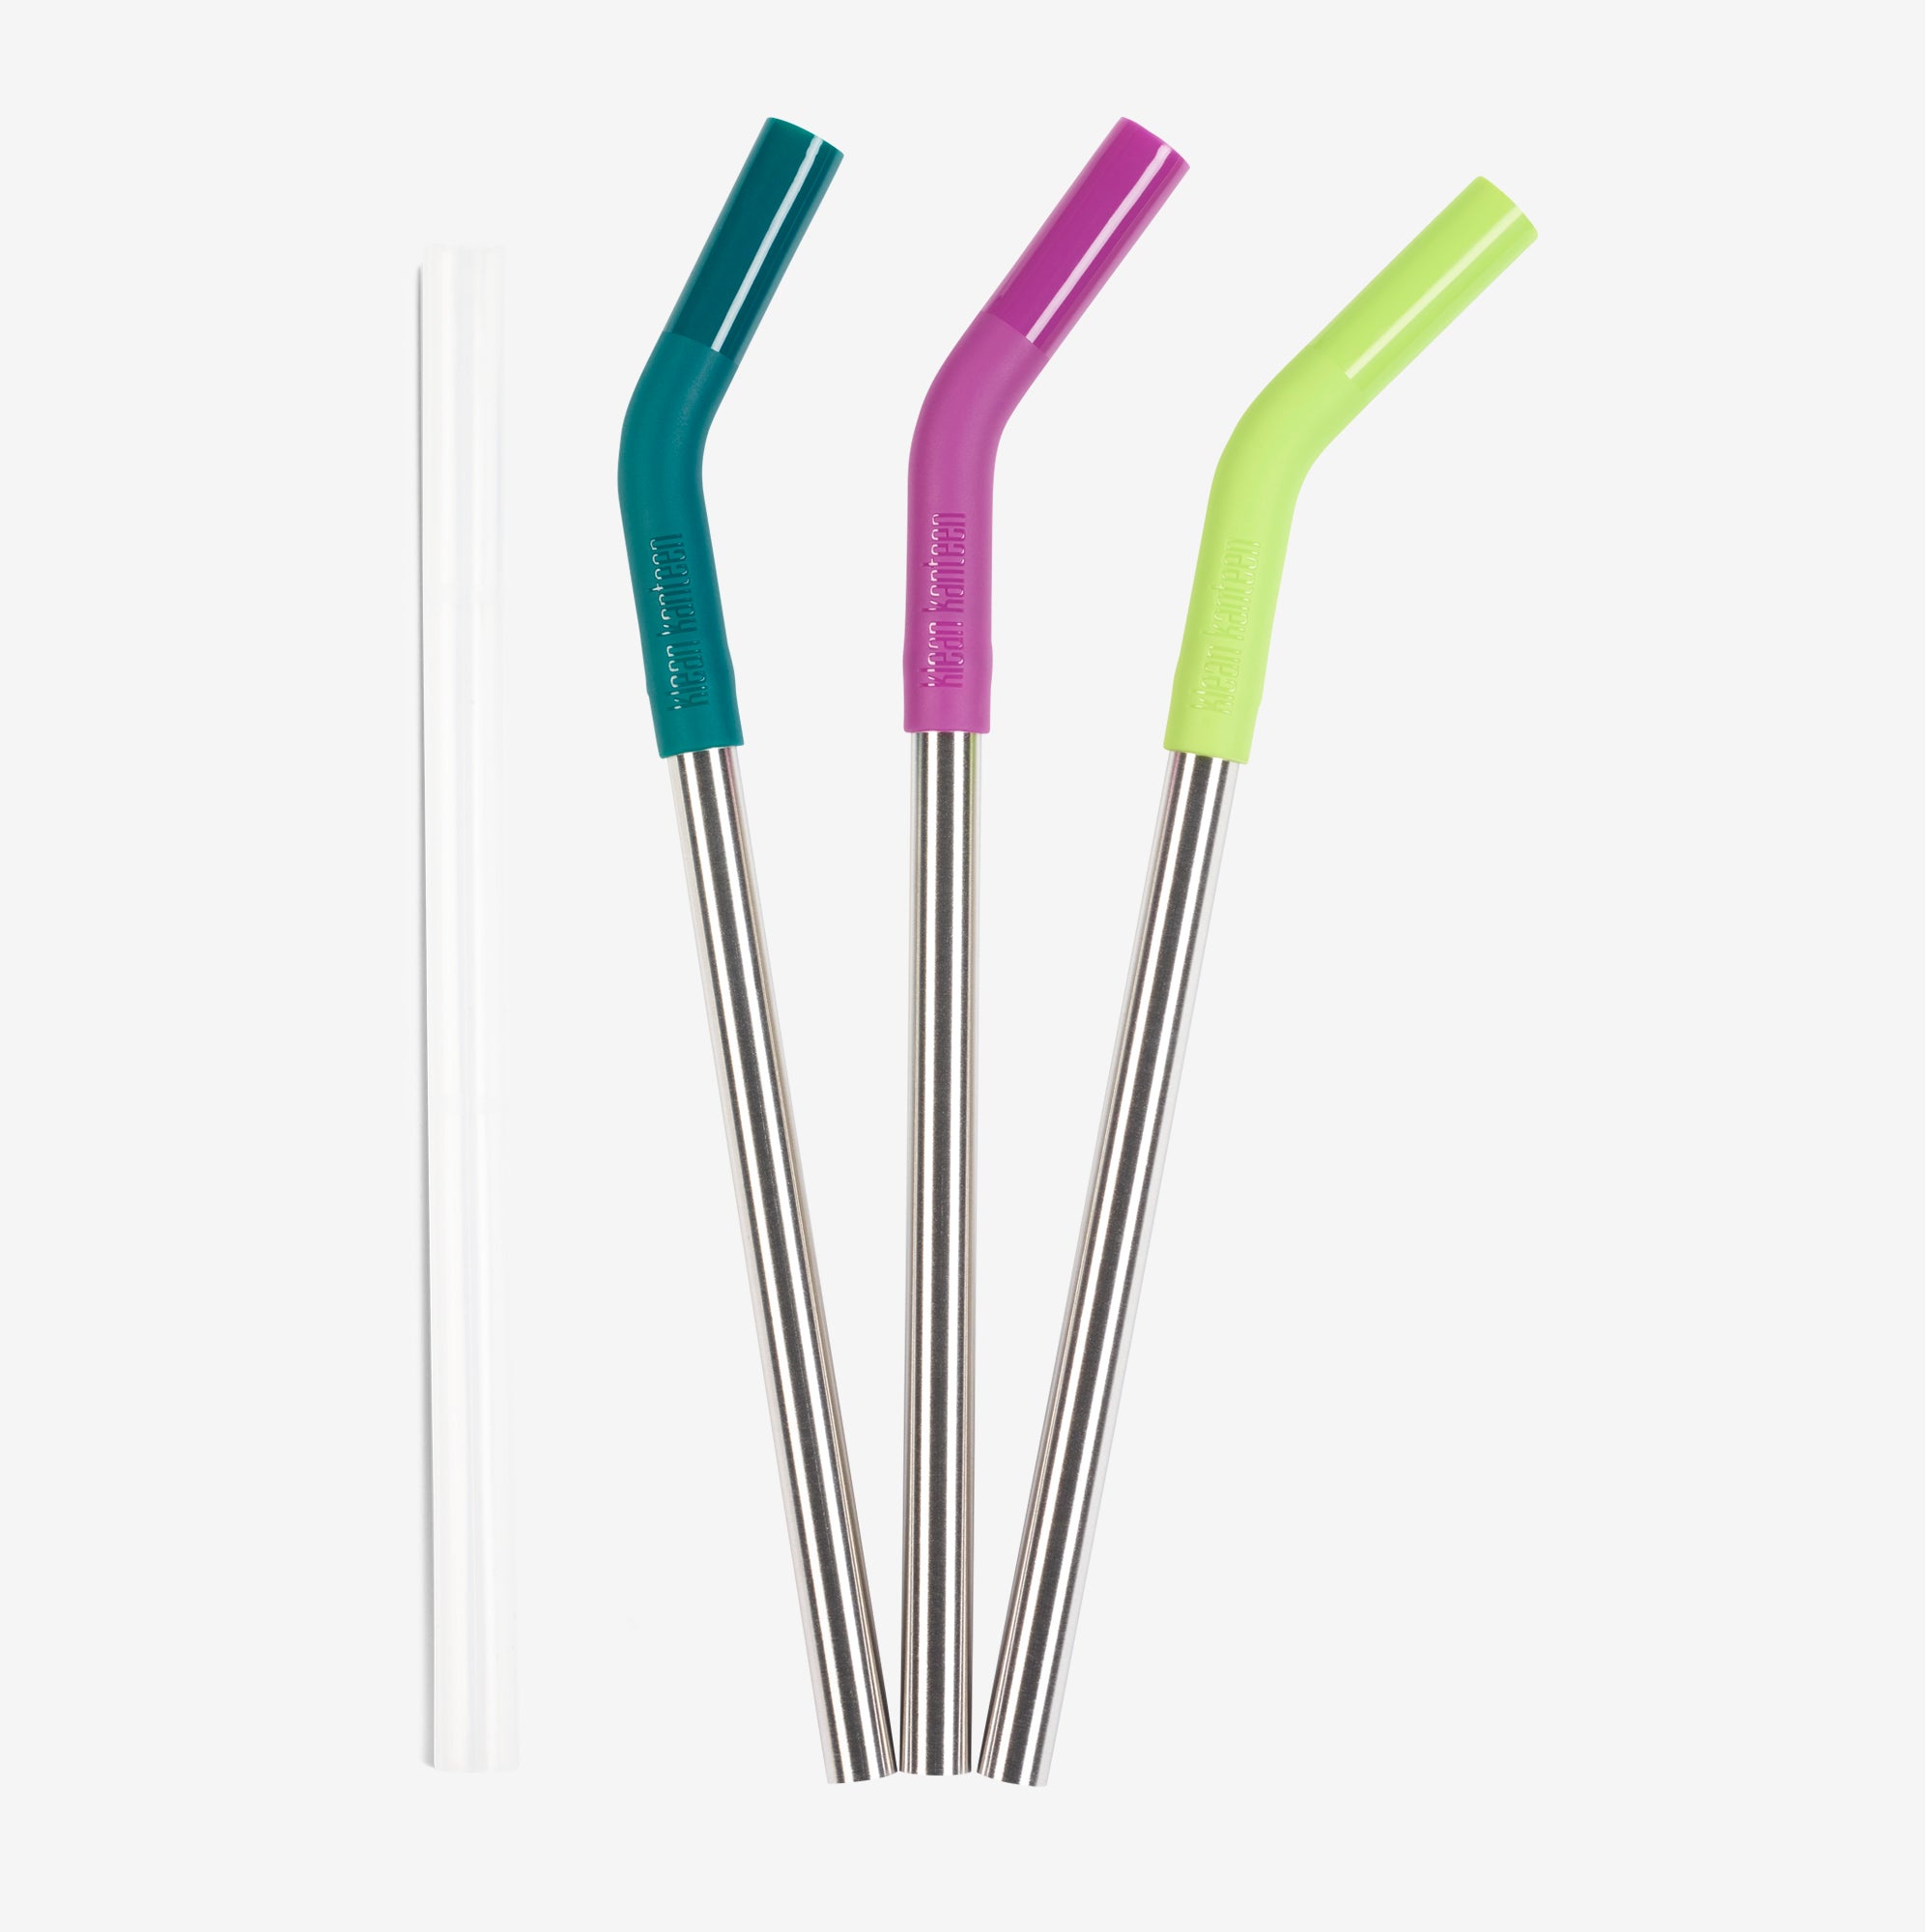 Klean Kanteen 4 Pack Stainless Steel Replacement Straws with Cleaning Brush 